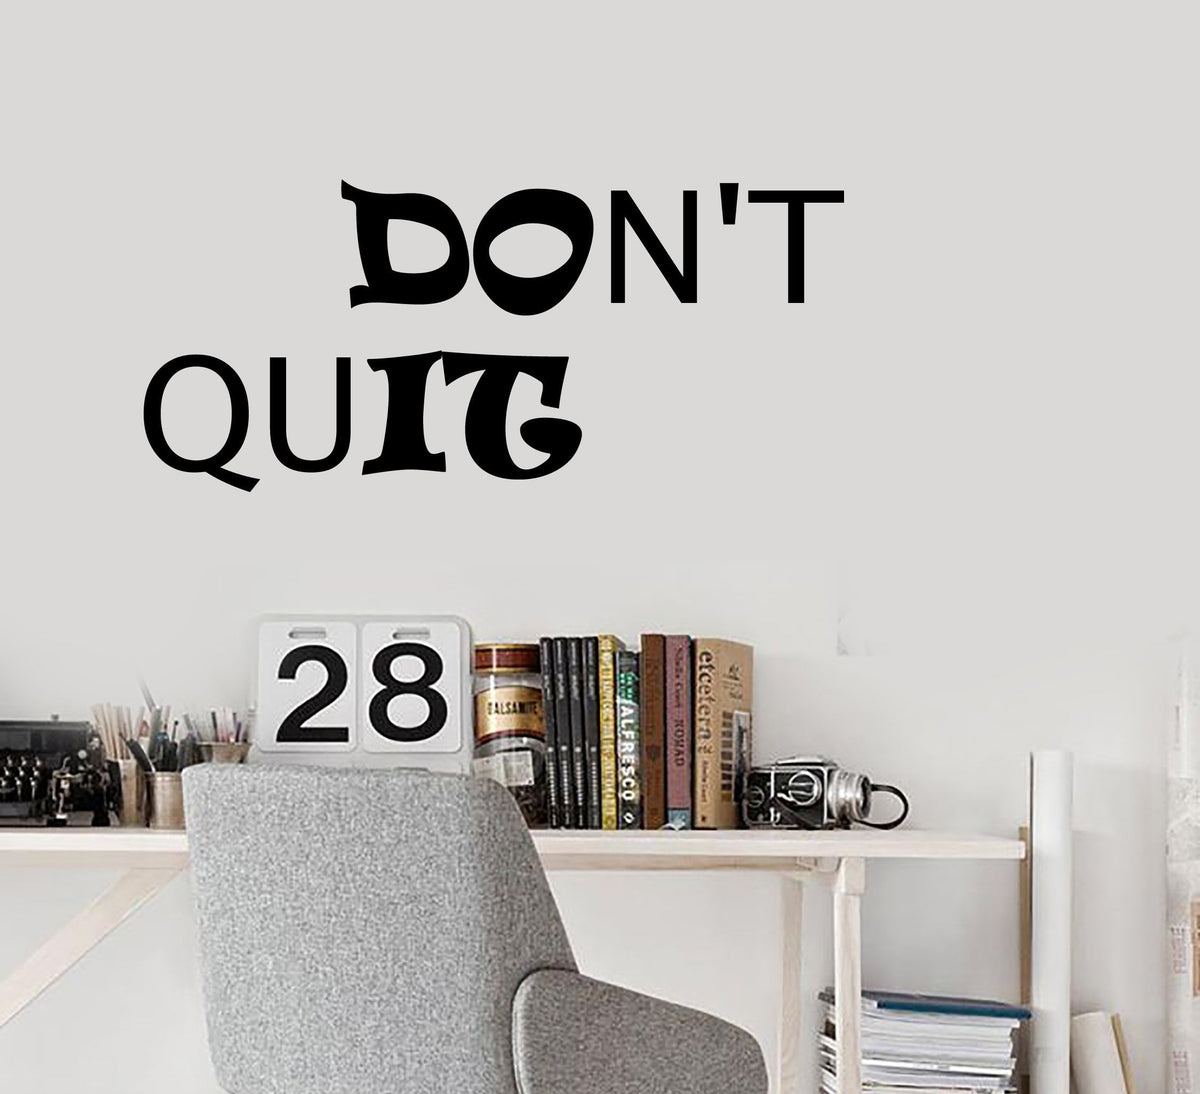 Vinyl Wall Decal Stickers Motivation Quote Words Inspiring Don't Quit ...